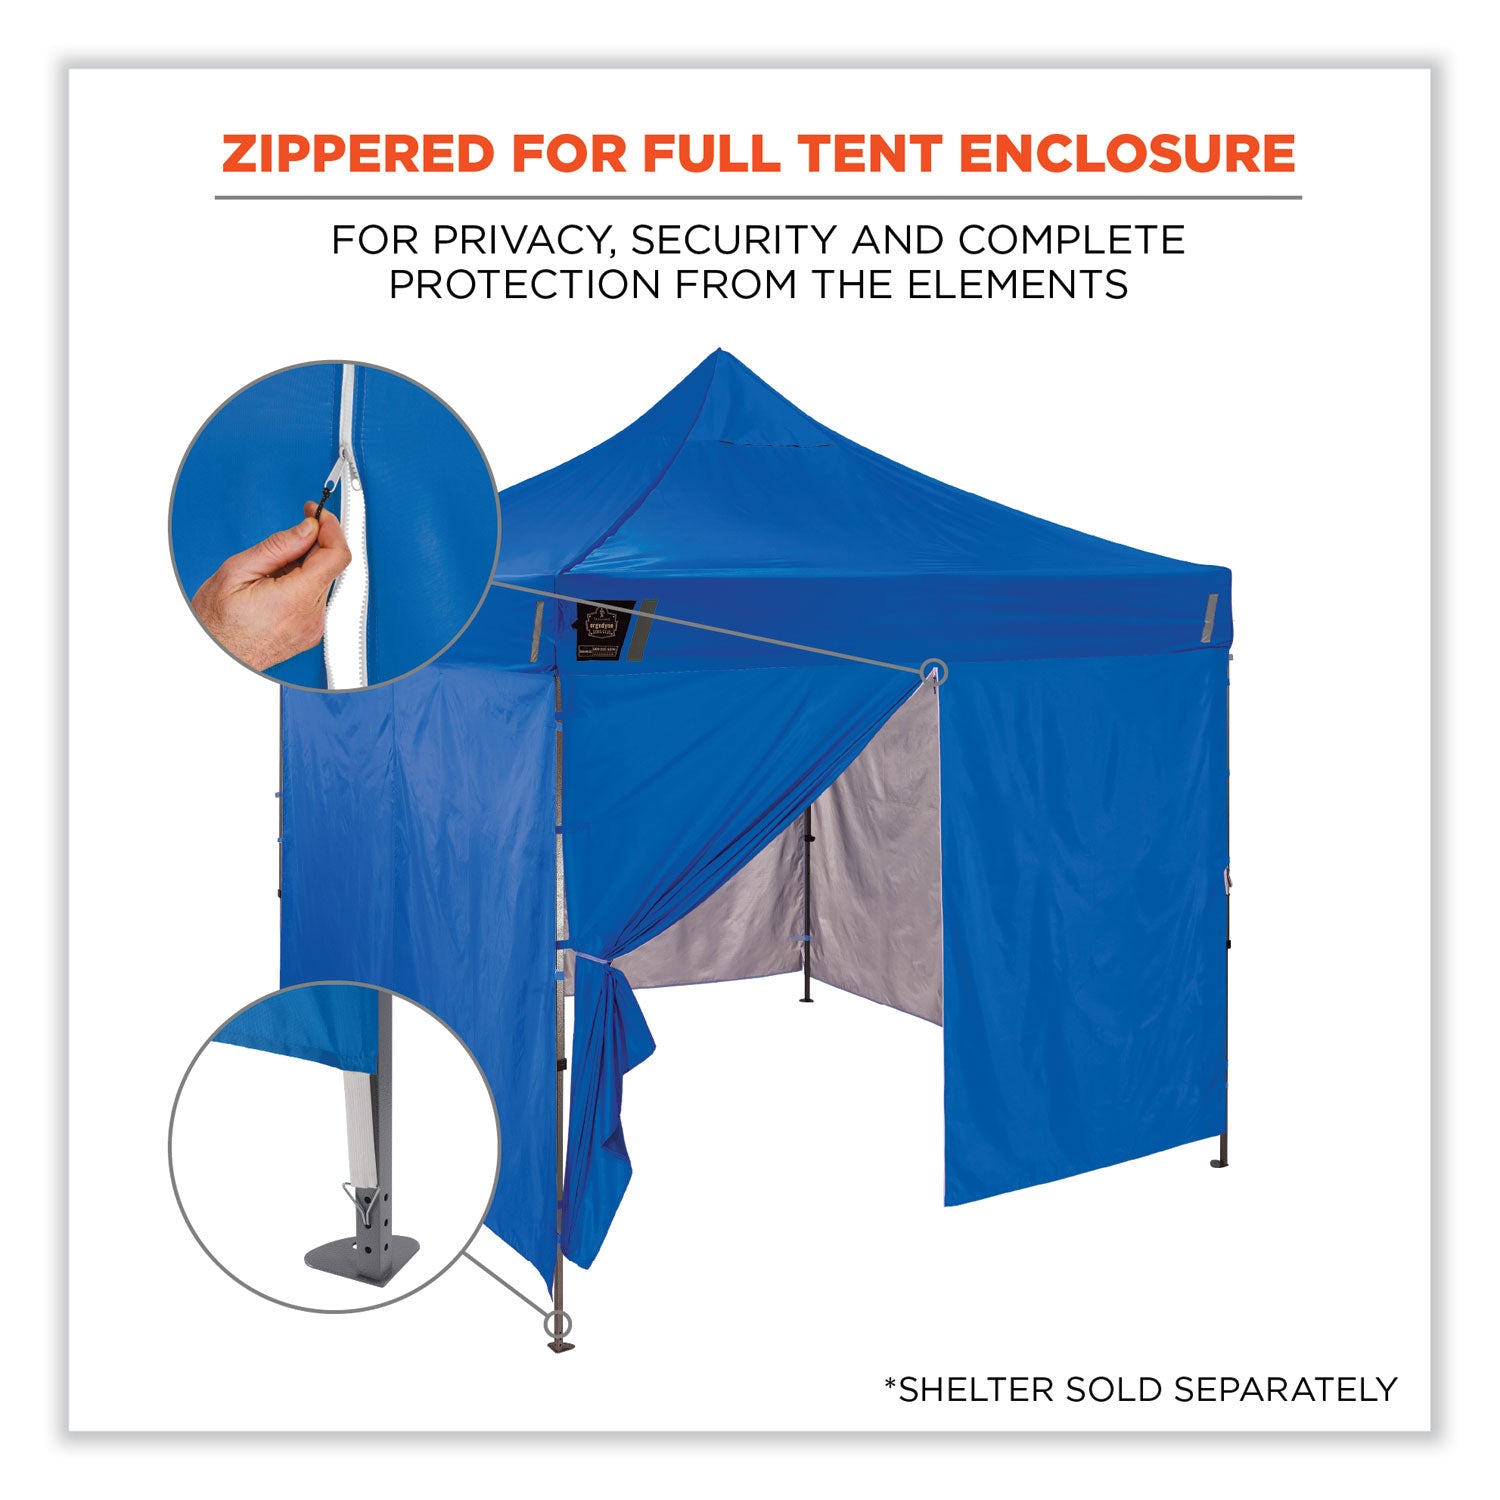 shax-6096-pop-up-tent-sidewall-with-zipper-single-skin-10-ft-x-10-ft-polyester-blue-ships-in-1-3-business-days_ego12979 - 2